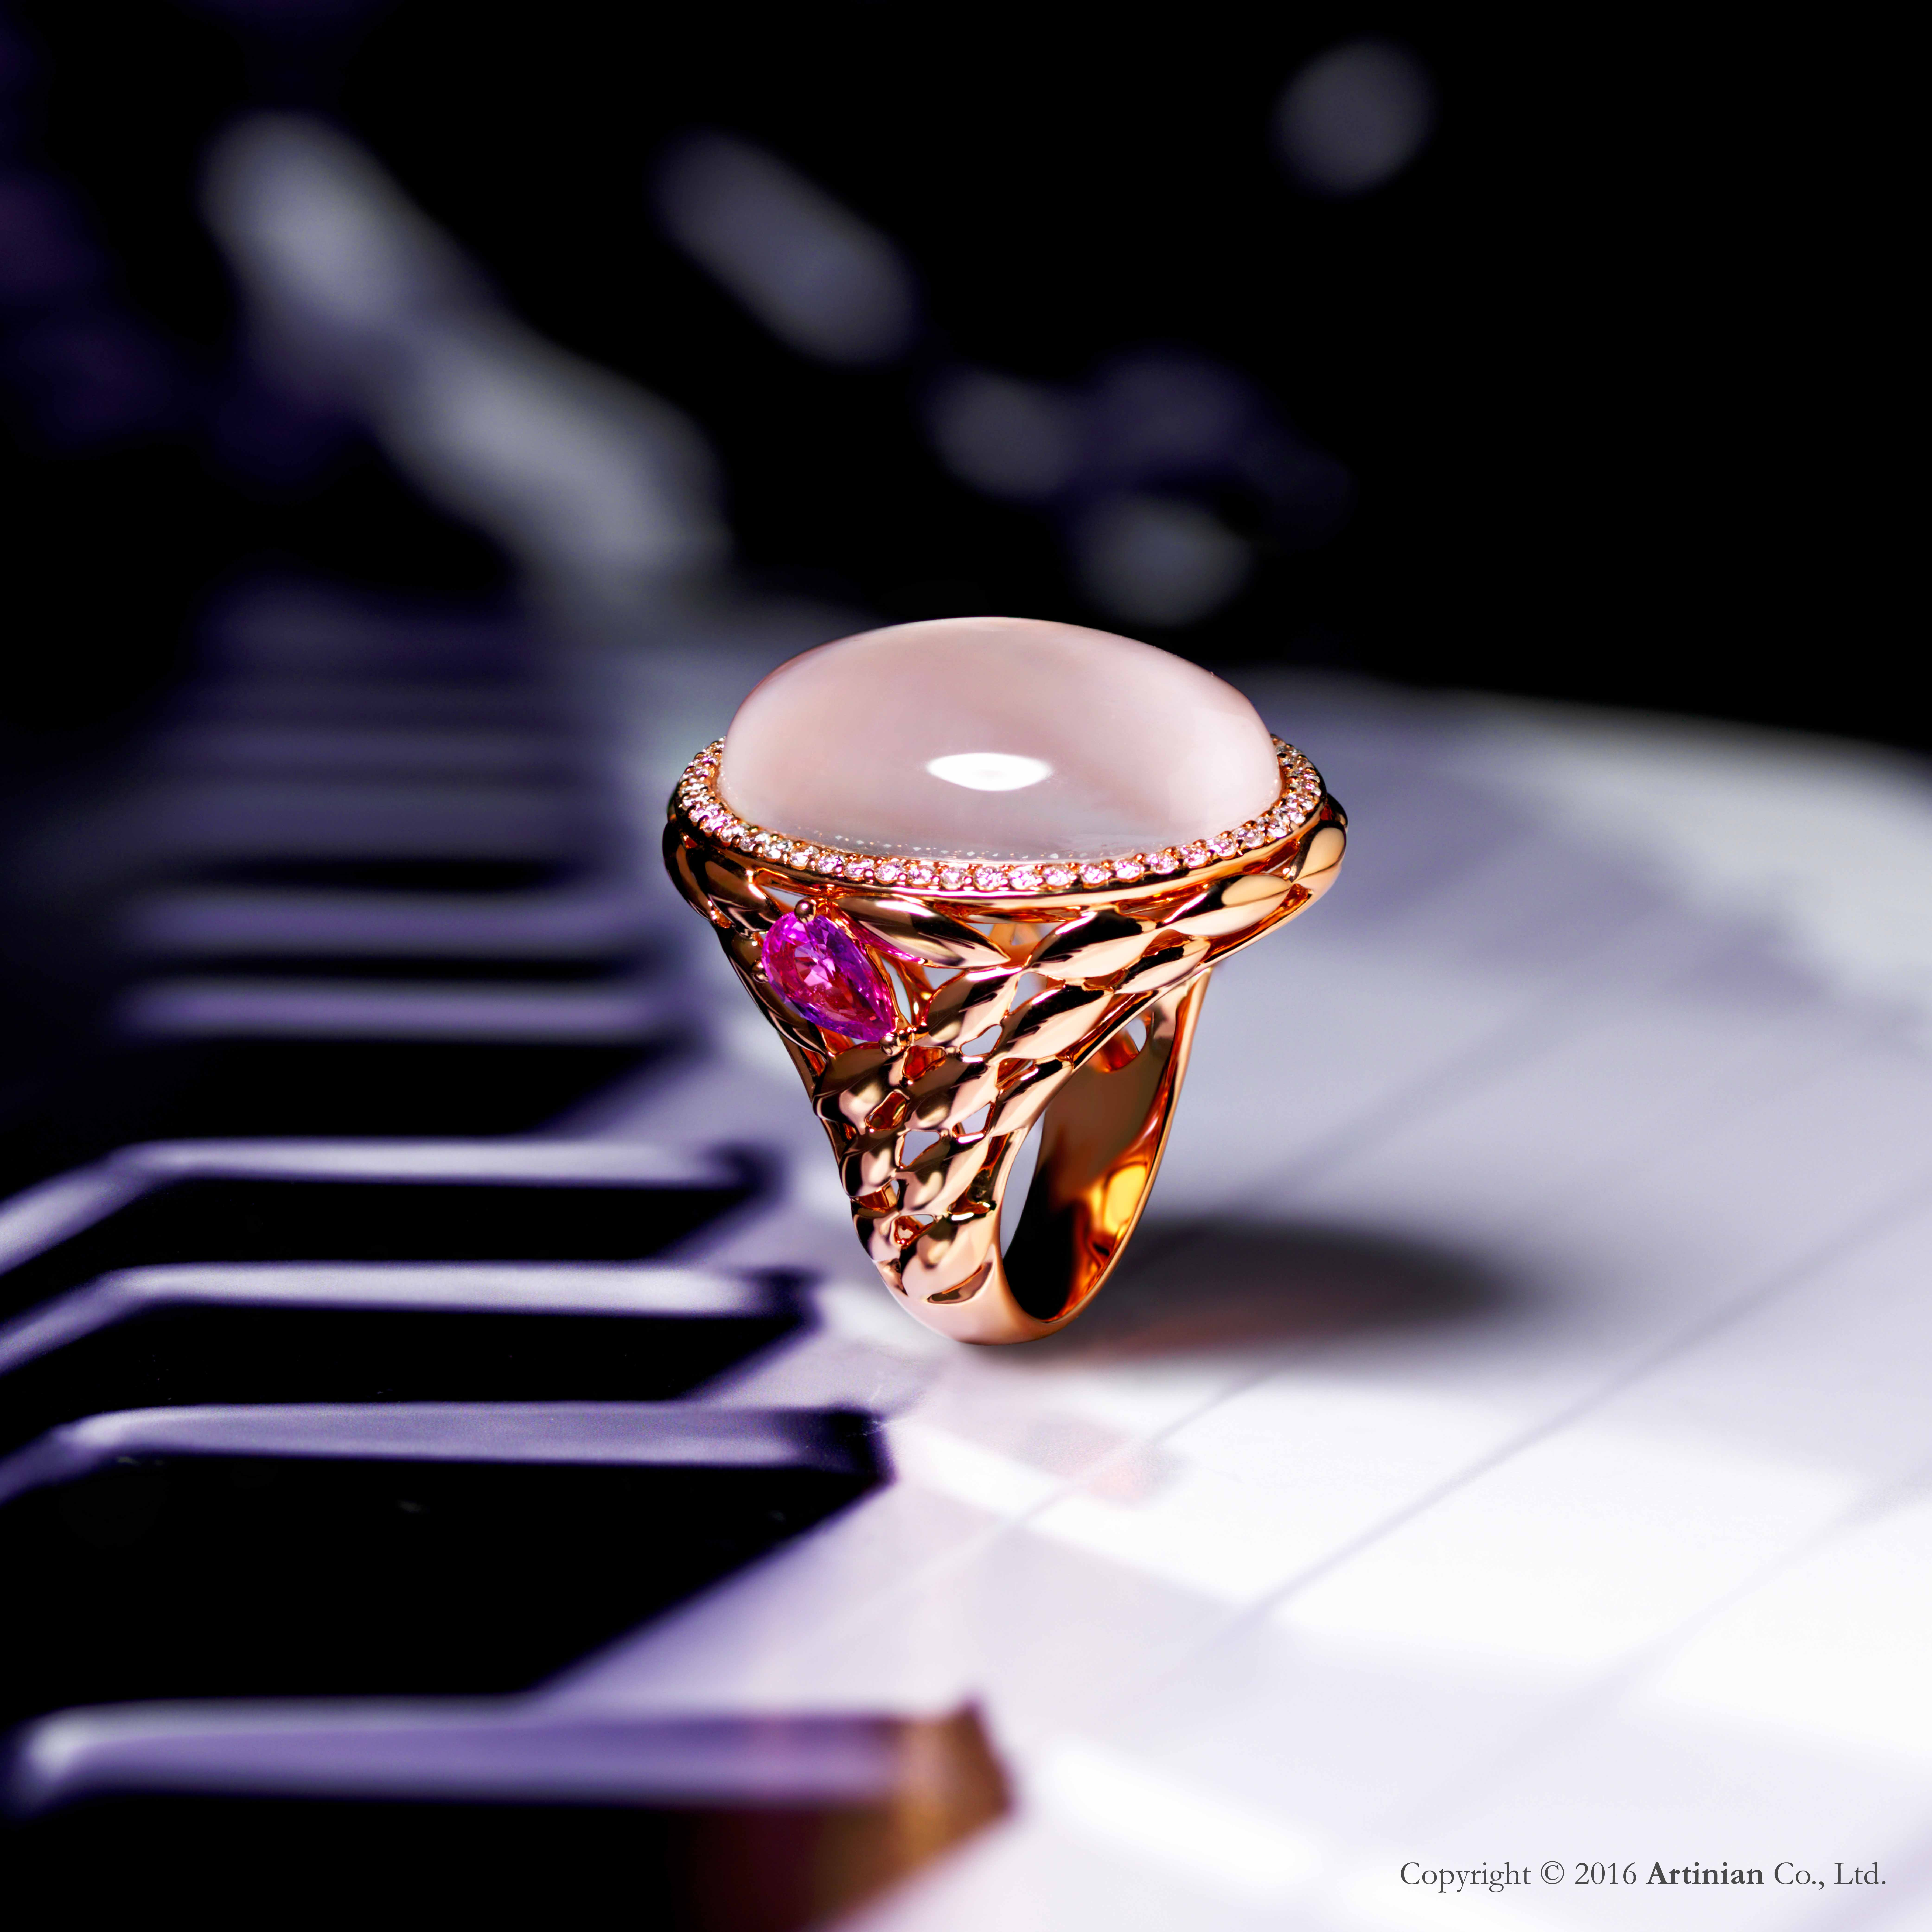 The pastels have indeed bloomed with the Artinian Fine Jewellery – Jazz Collection